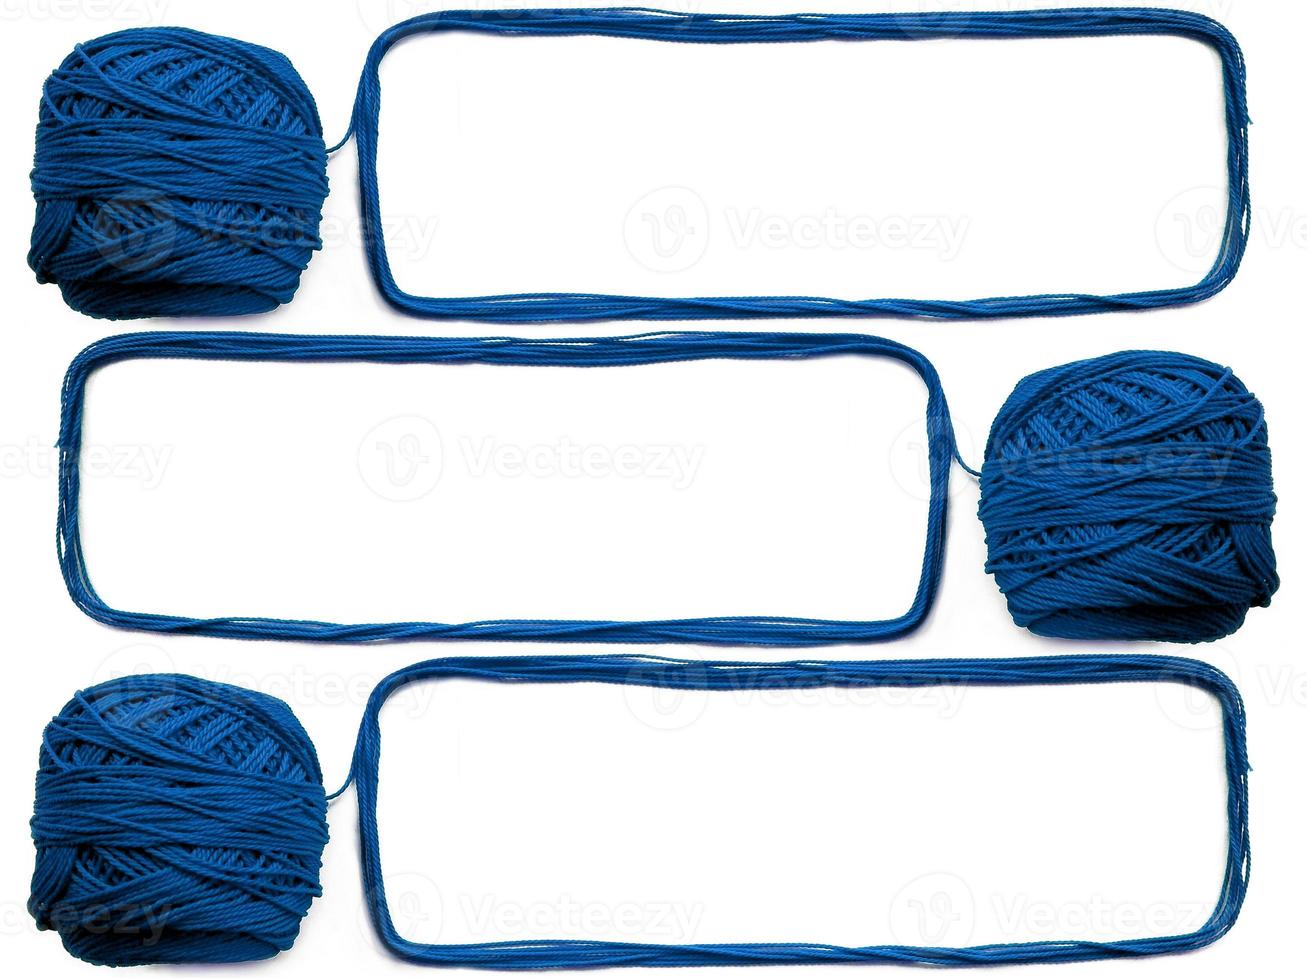 Knitting yarn for handicrafts isolated on white background photo